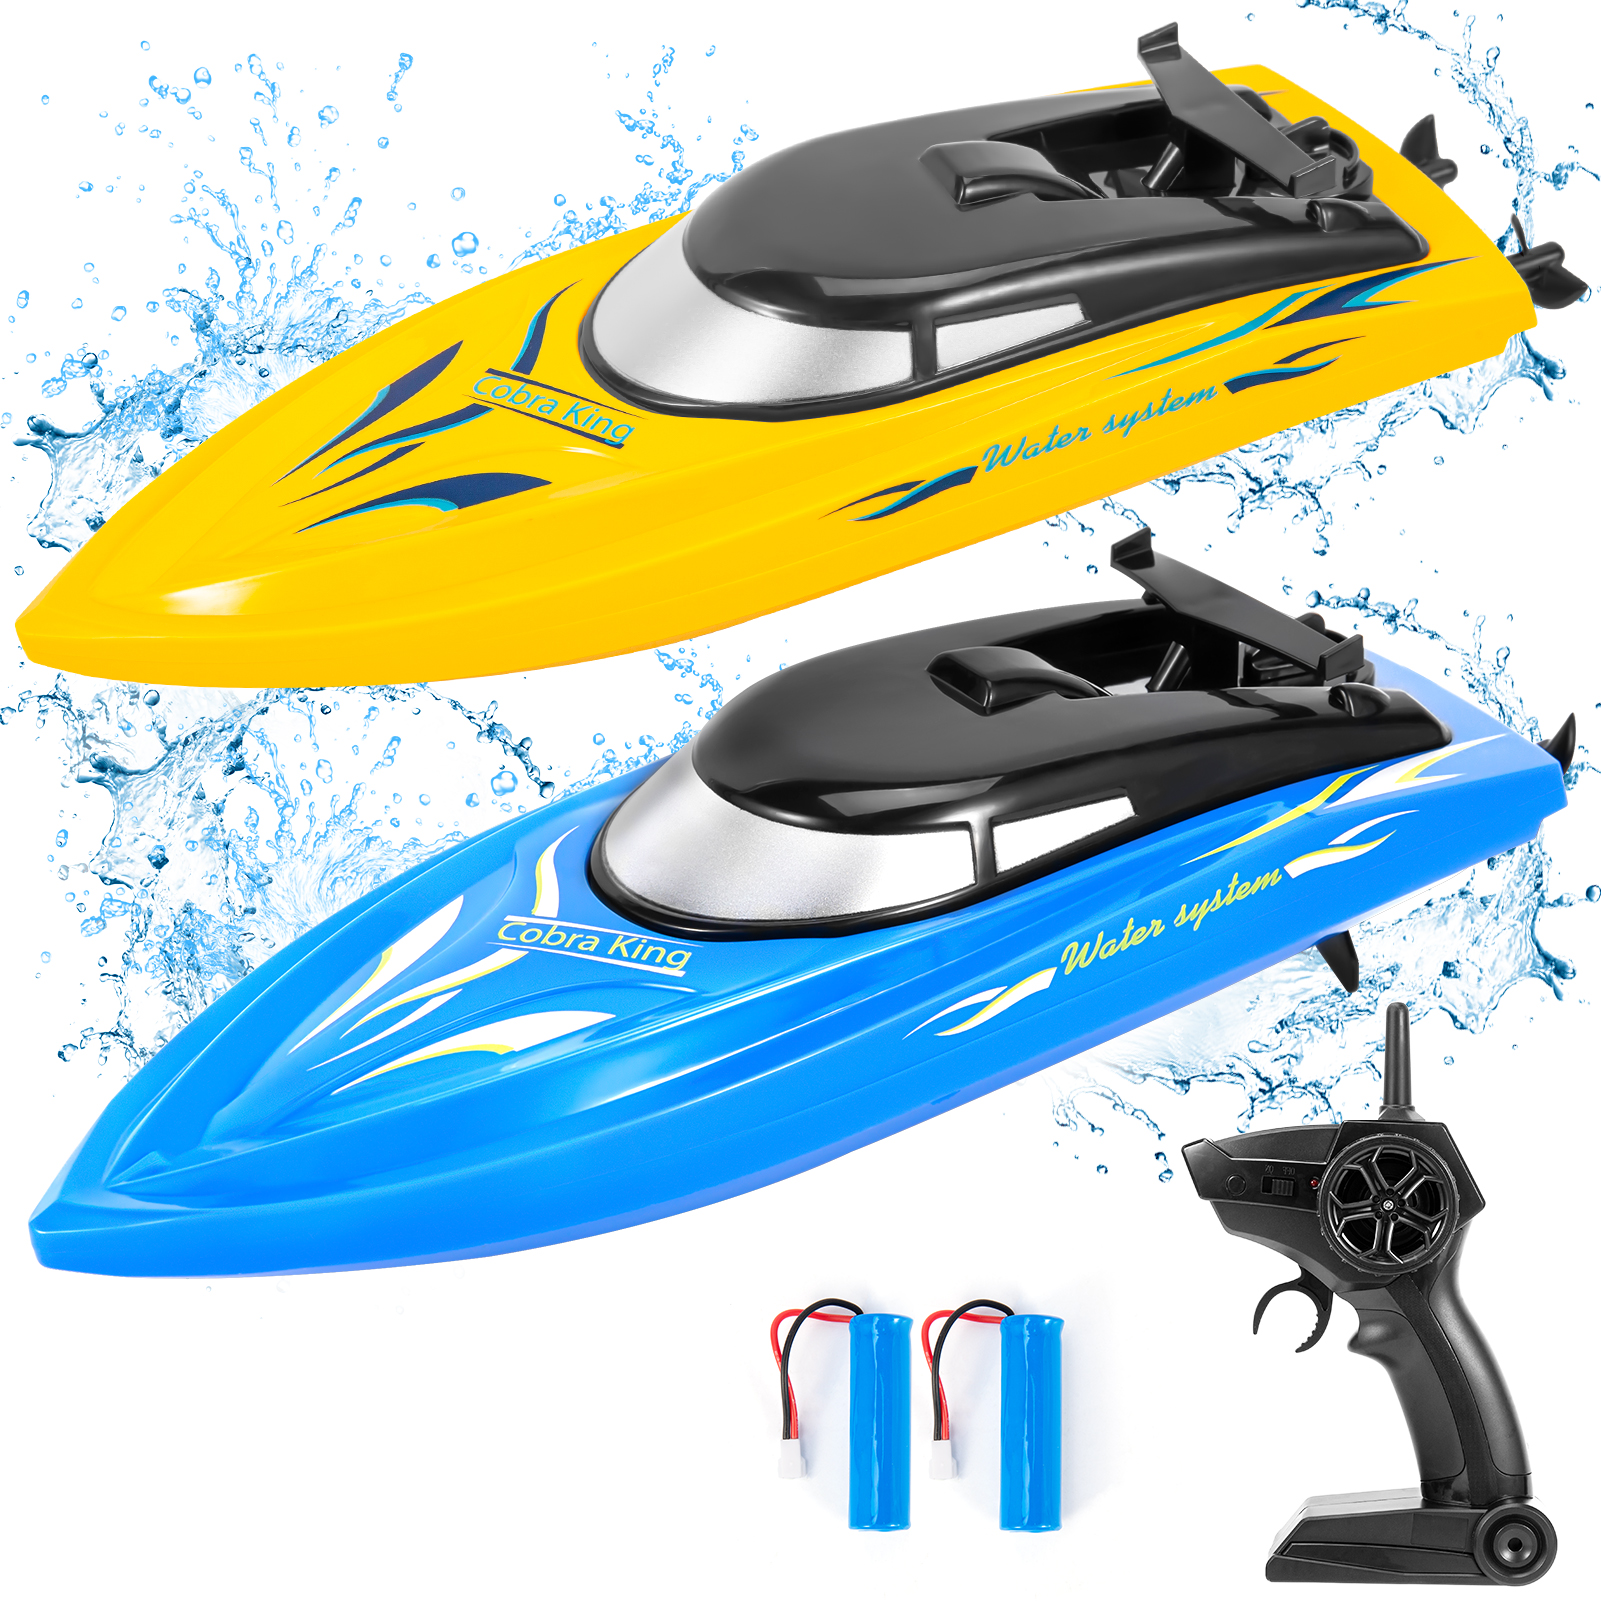 [US Direct] THINKMAX 2PACK 10km/H 2.4G High Speed Remote Control Boats (Blue+Yellow)